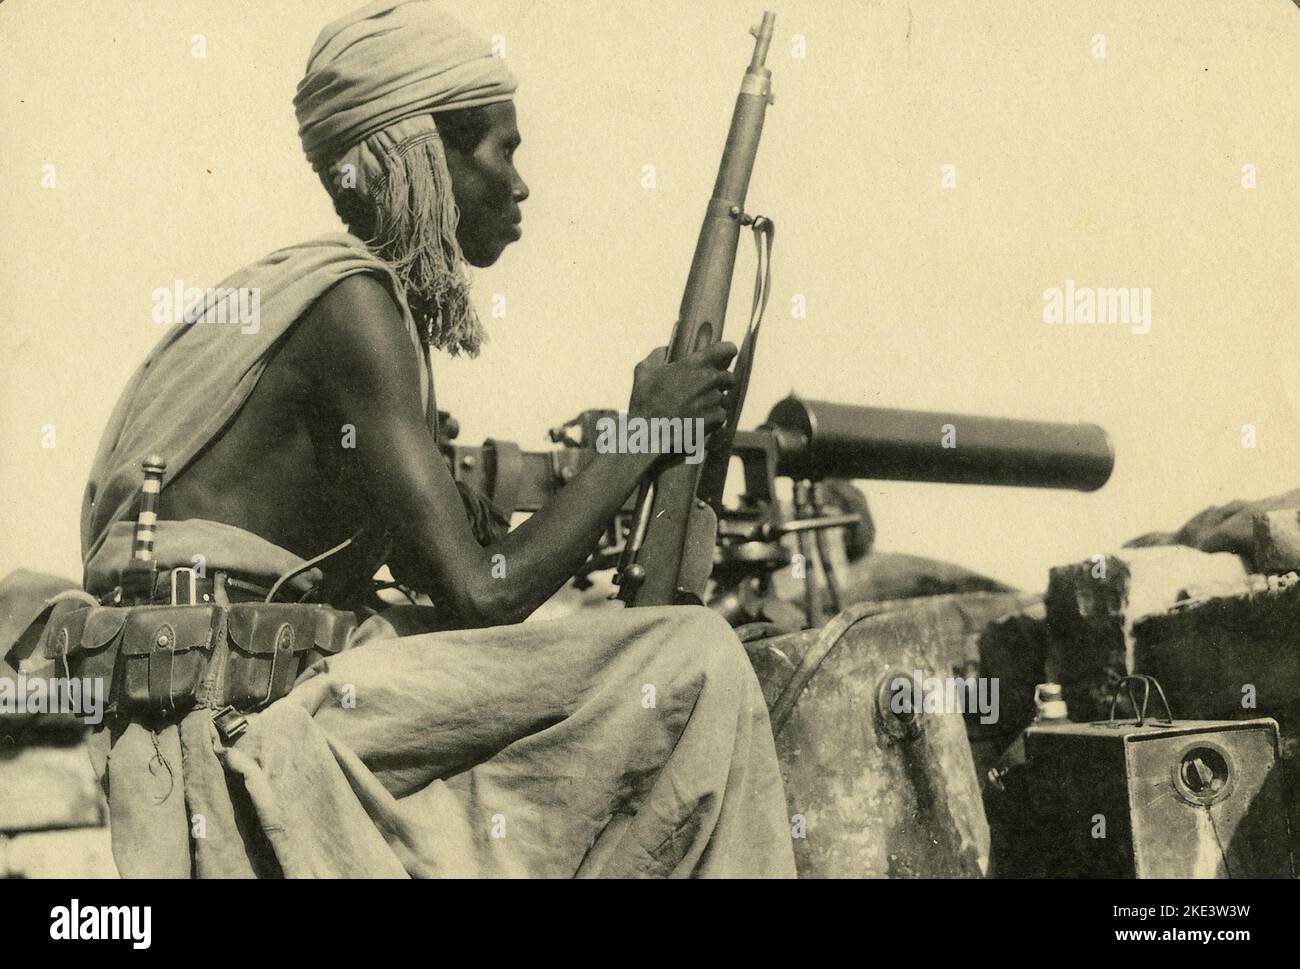 Abissinian enforced in the Italian army next to a FIAT 14 machine gun, Abissinian War 1936 Stock Photo